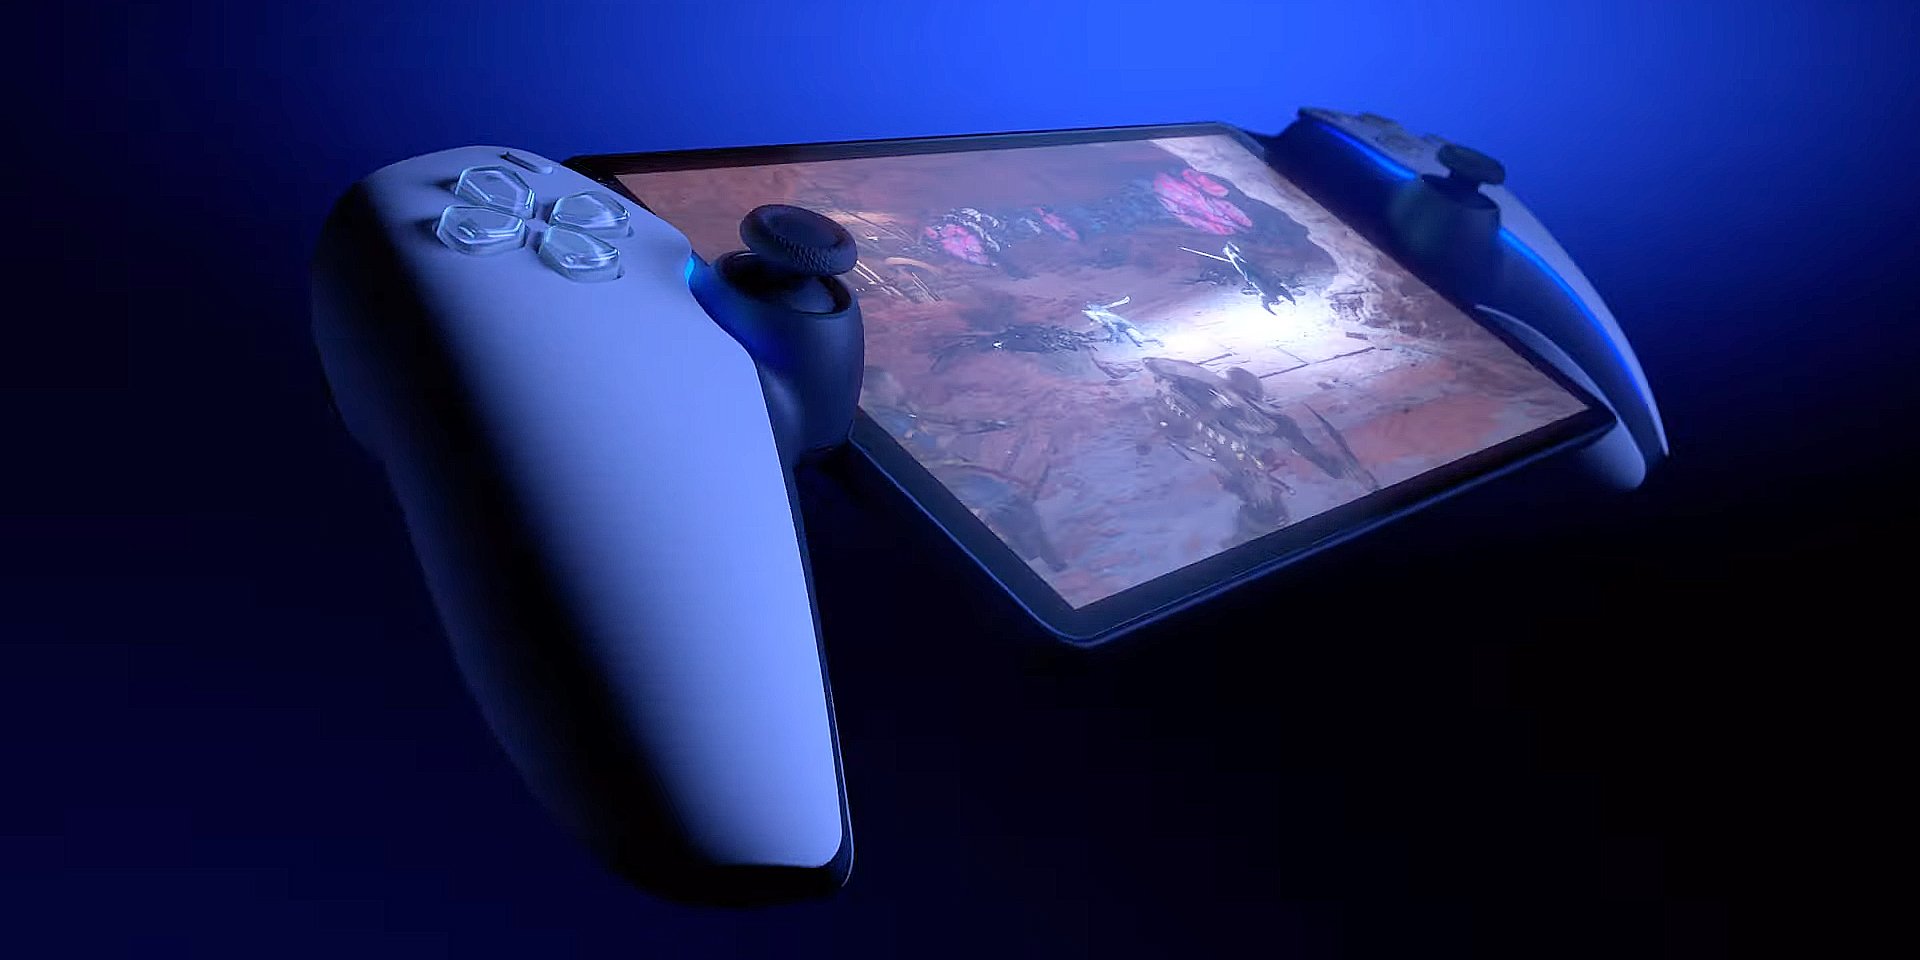 Sony has announced a portable console and TWS headphones for the PS5